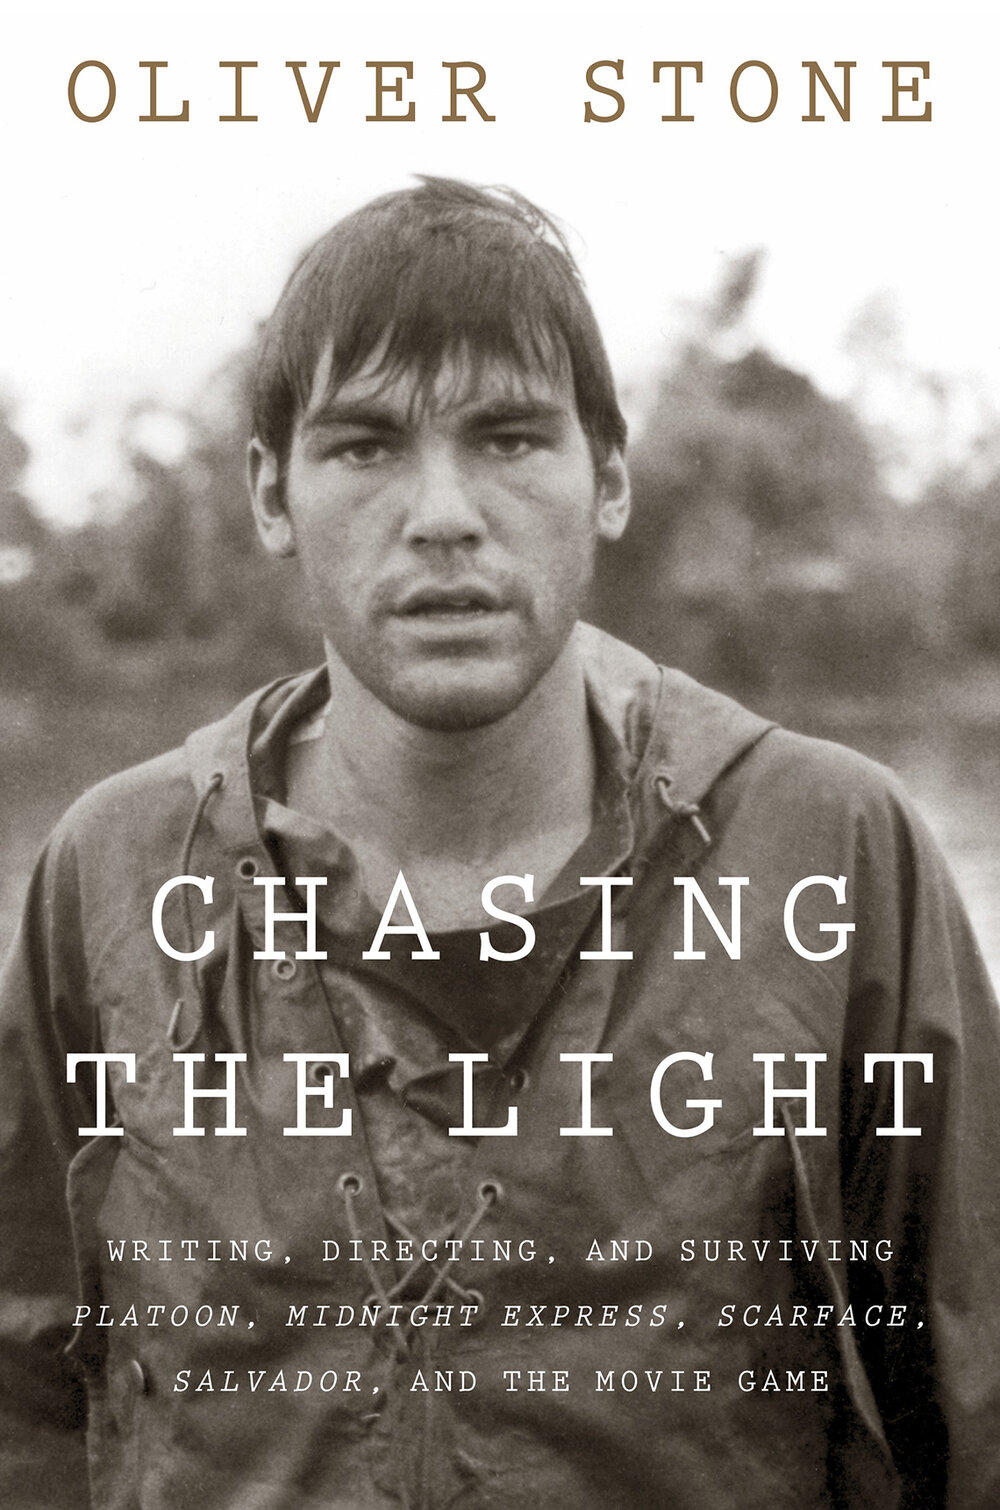 Chasing the Light: Writing, directing, and surviving Platoon, Midnight Express, Scarfface, Salvador, and the Movie Game by Oliver Stone